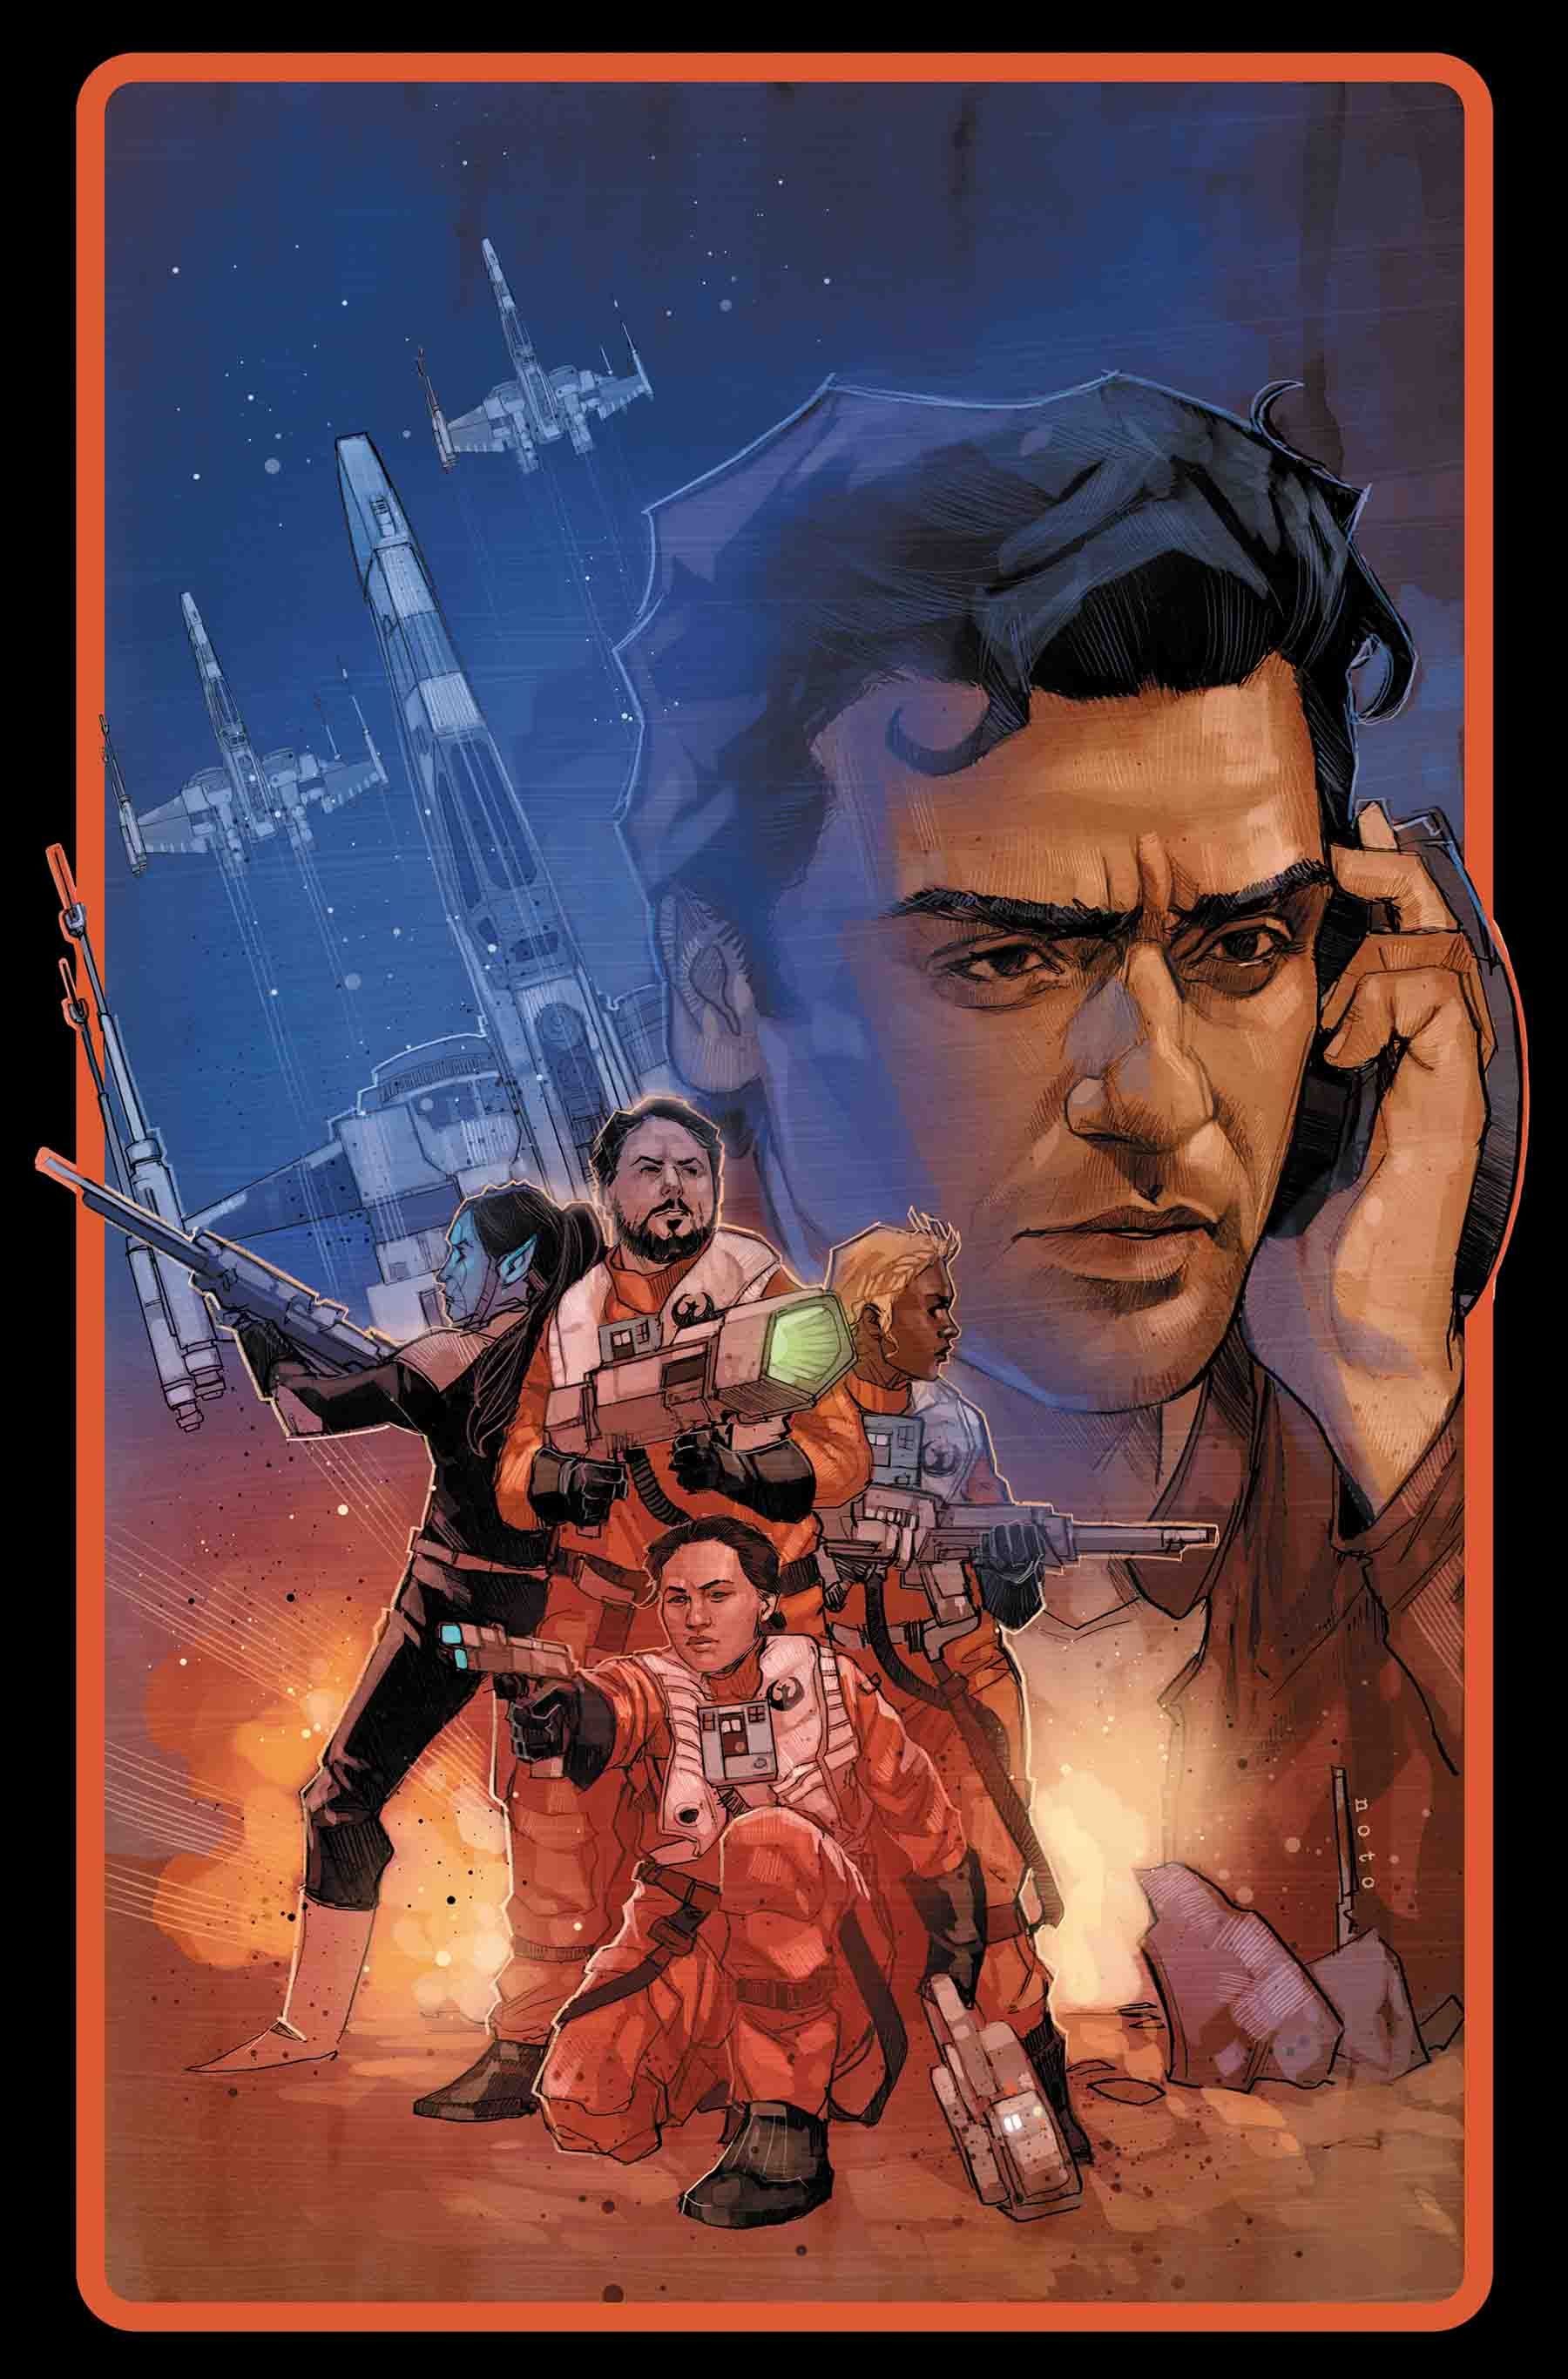 Star Wars: Poe Dameron #29 cover by Phil Noto